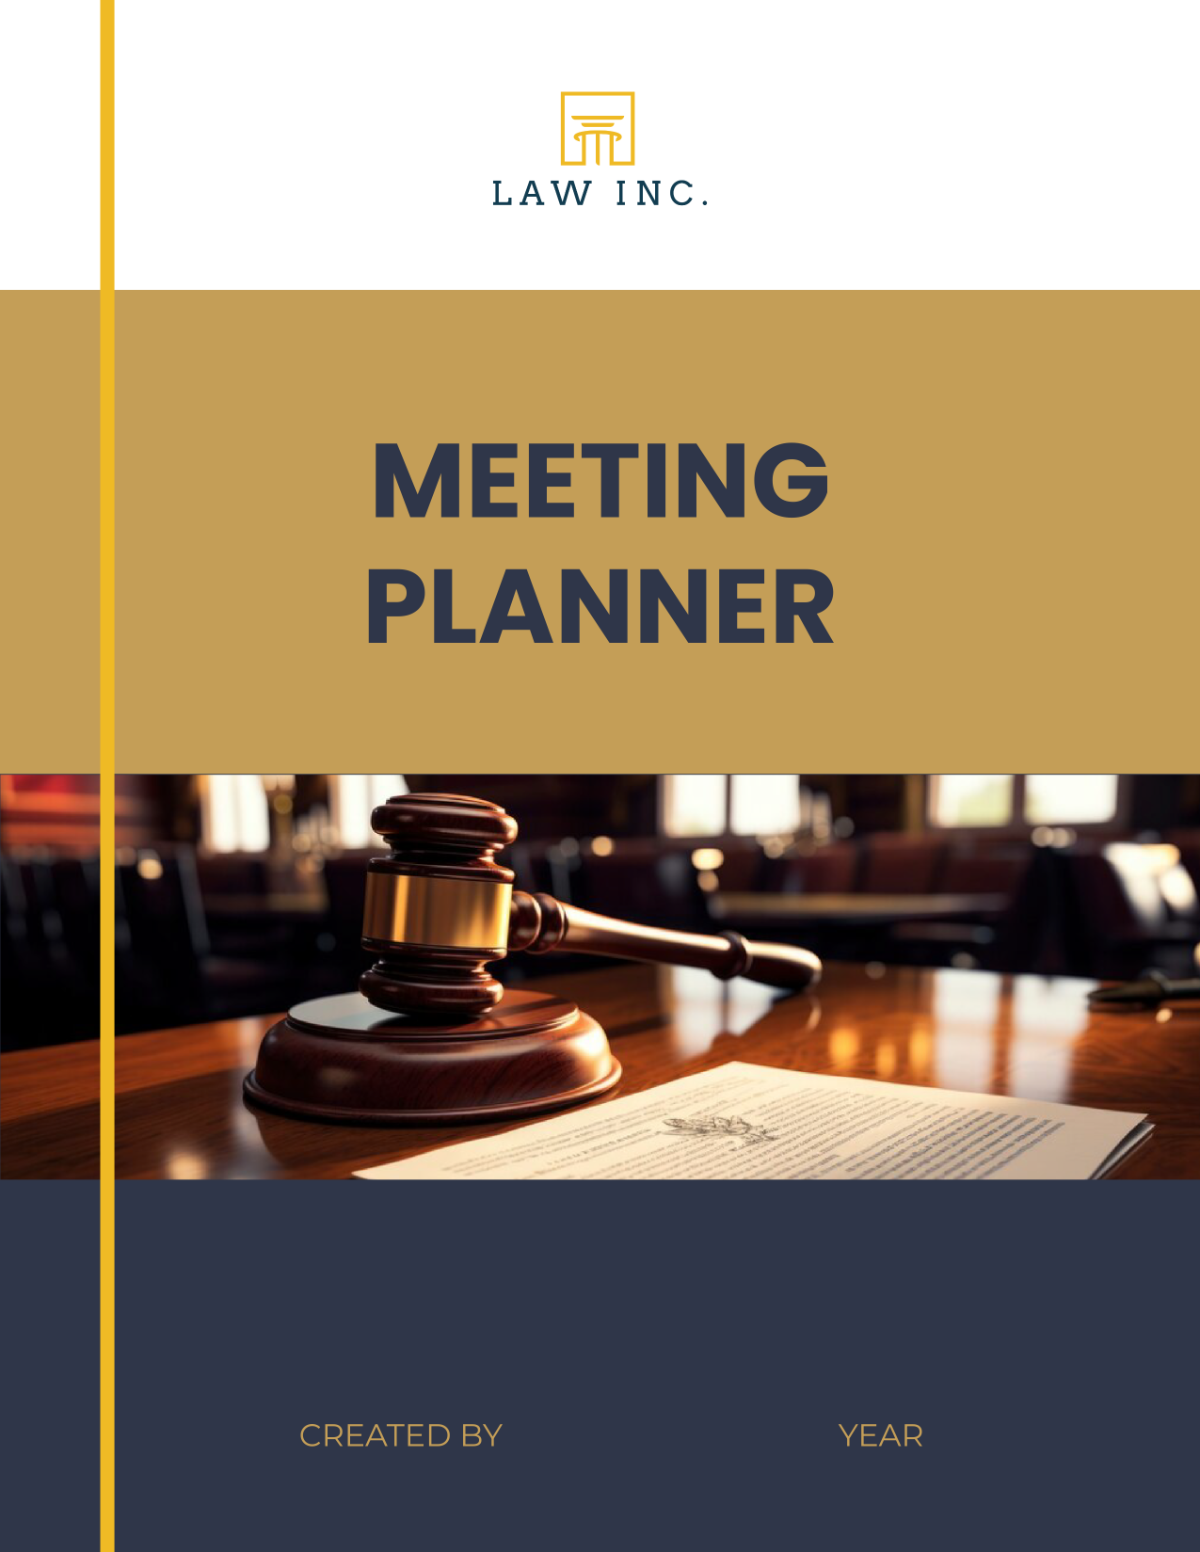 Law Firm Meeting Planner